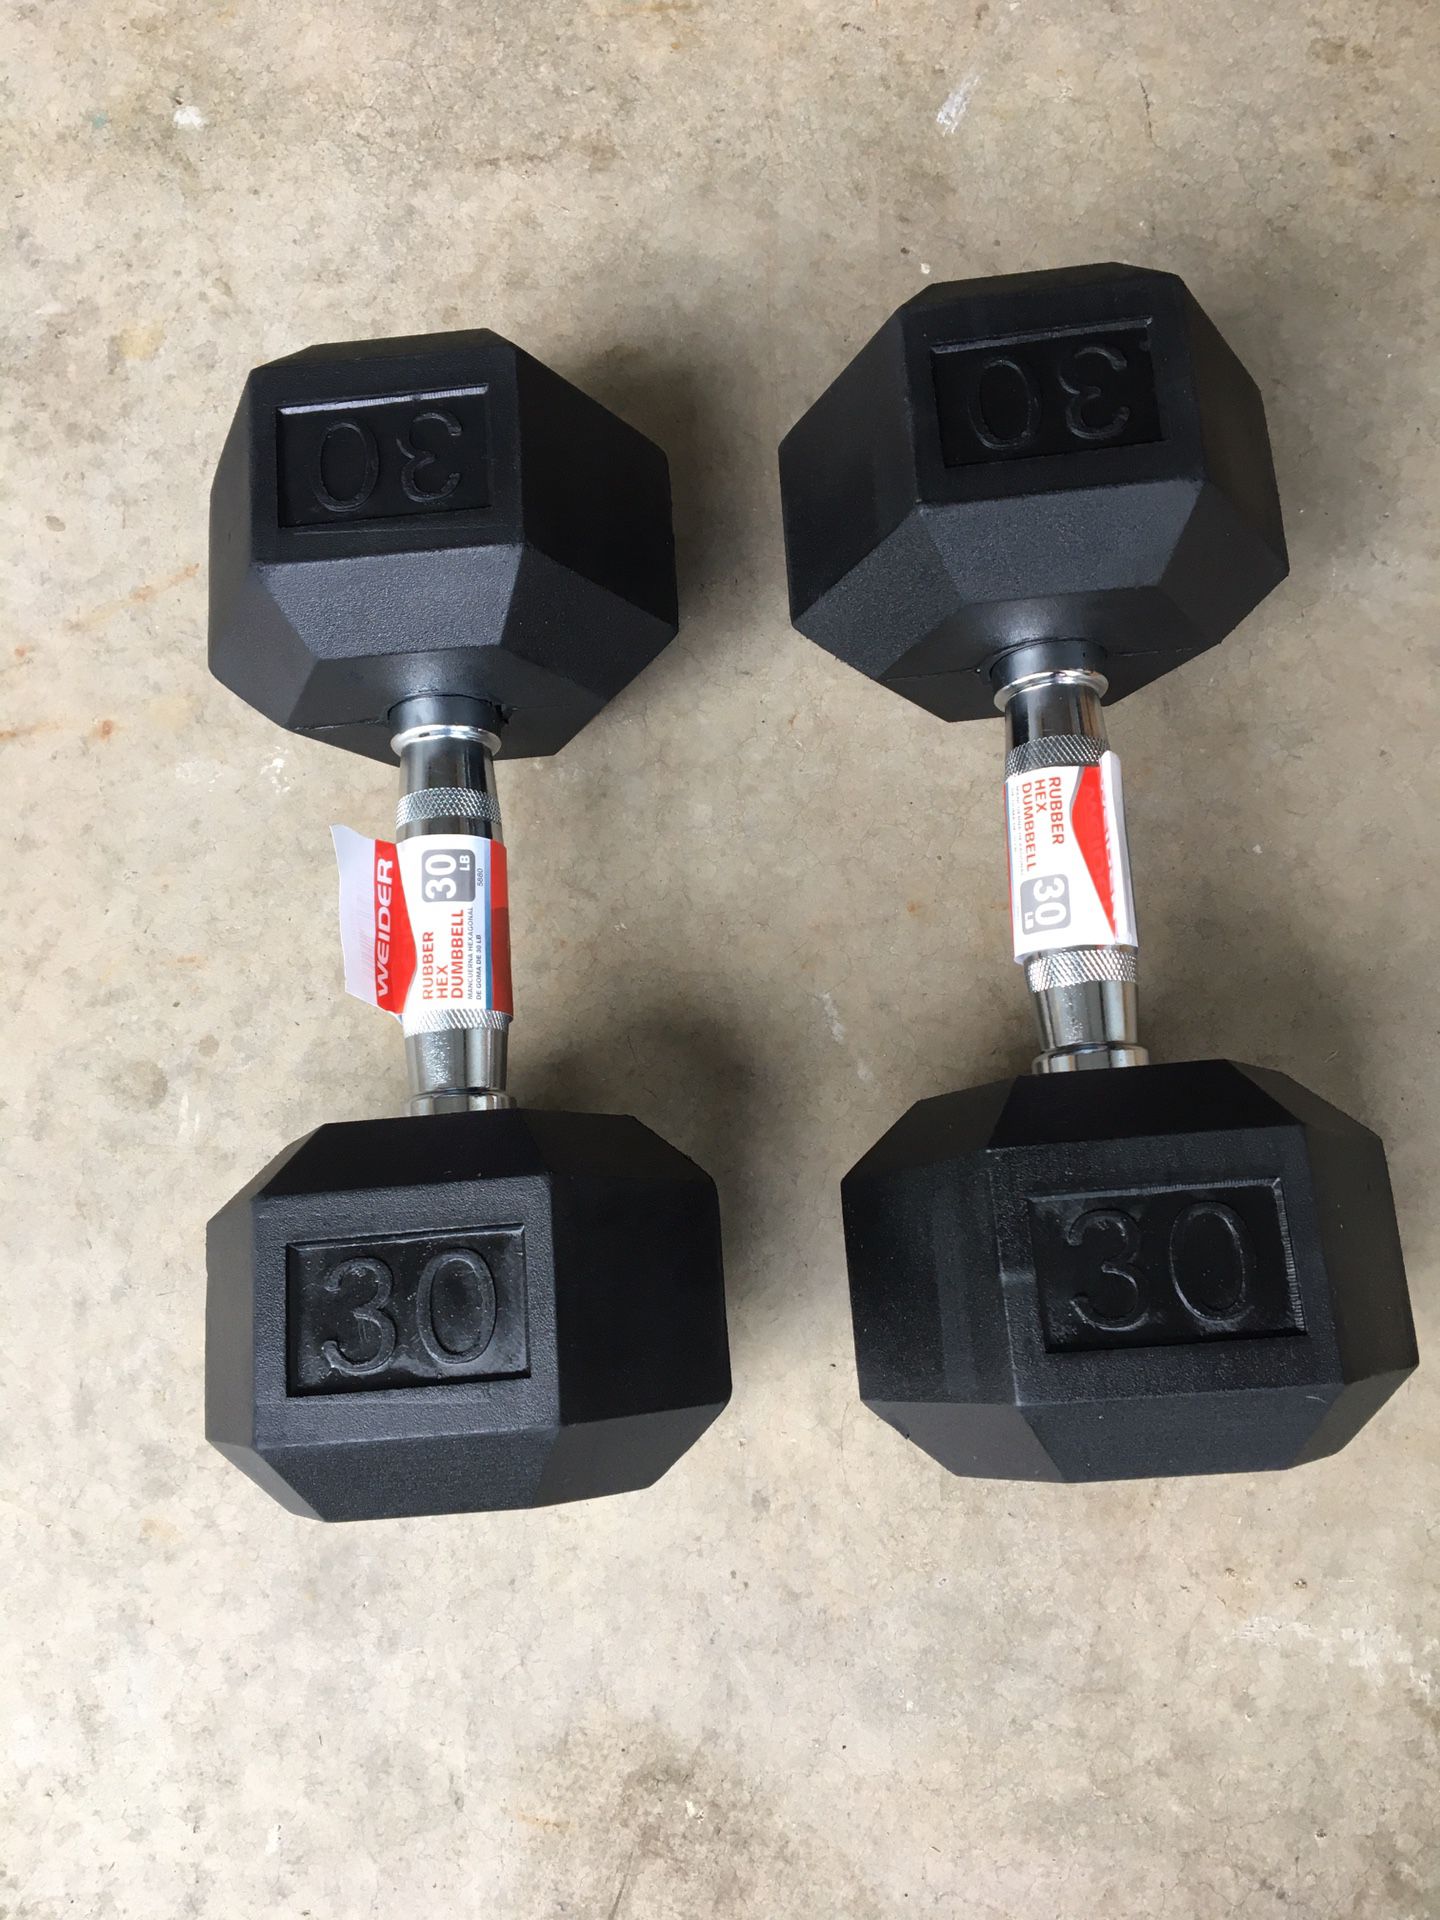 Delivery available. Pair of 30lb rubber coated hexagon dumbbells. 60lb total weight. These are brand new and have never been used. $135firm